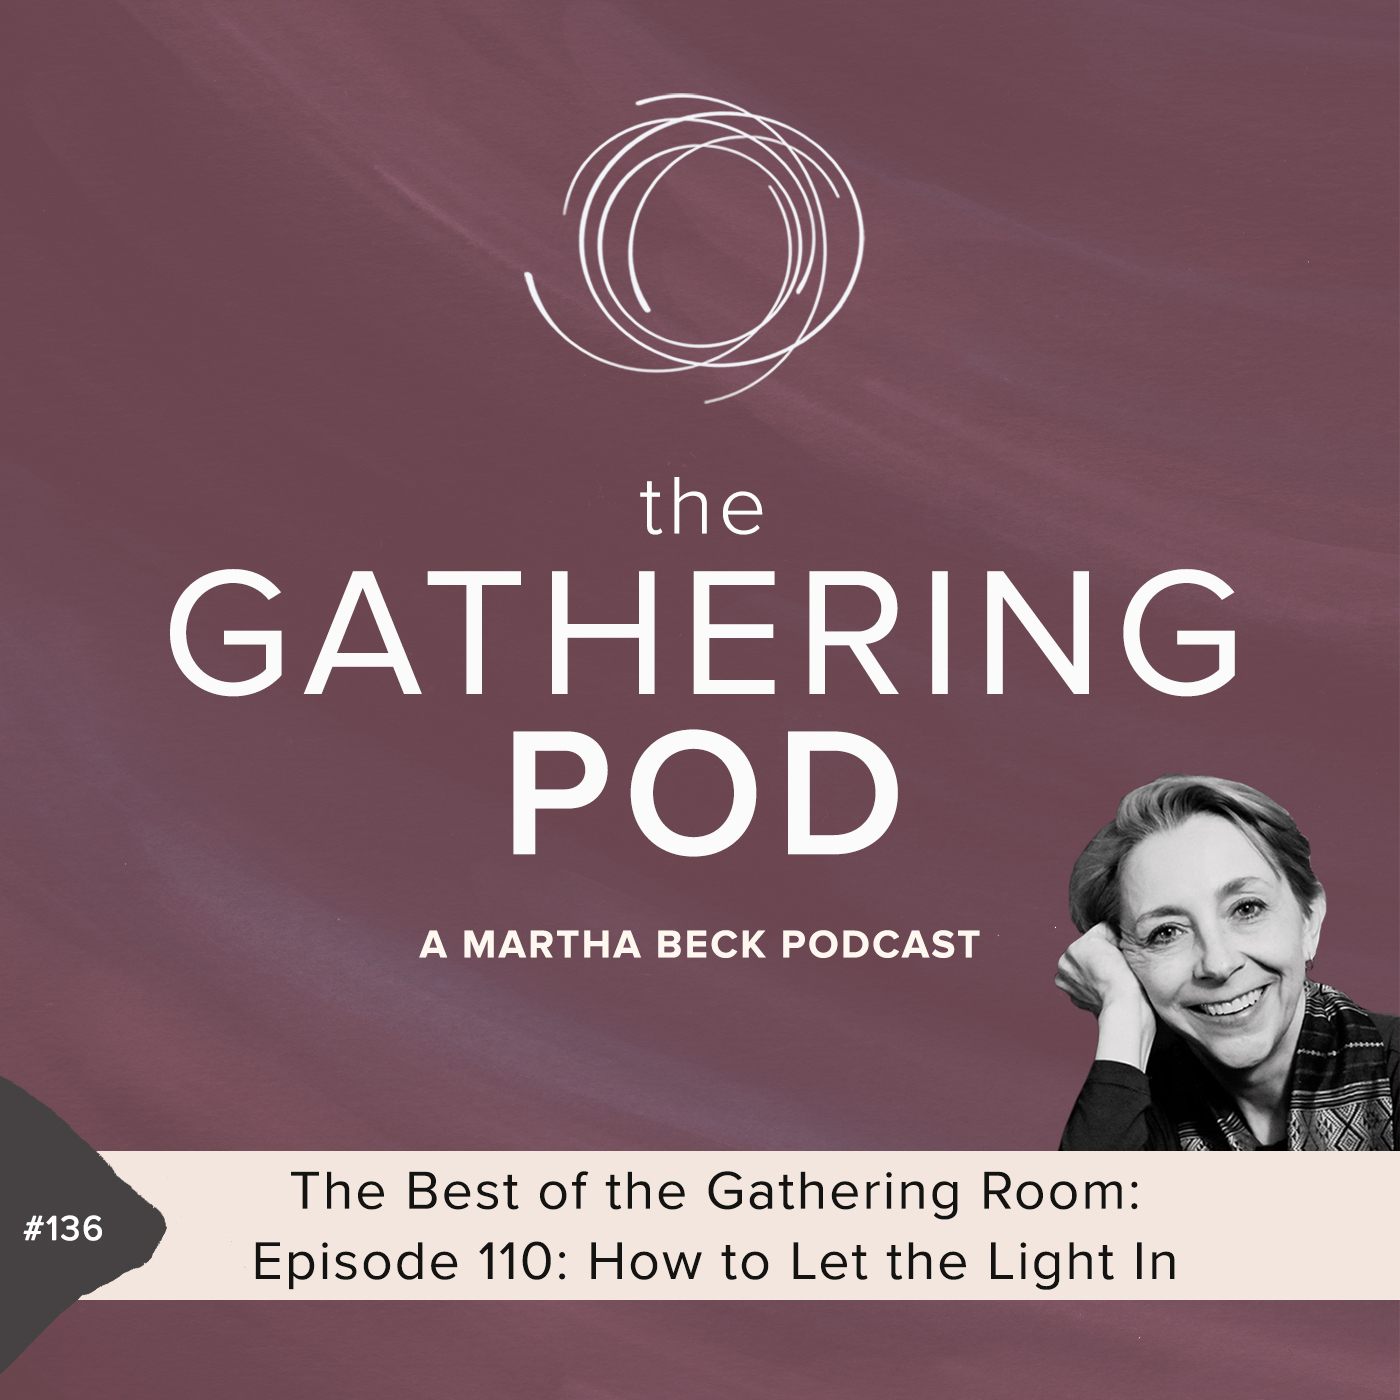 The Best of the Gathering Room - Episode 110: How to Let the Light In